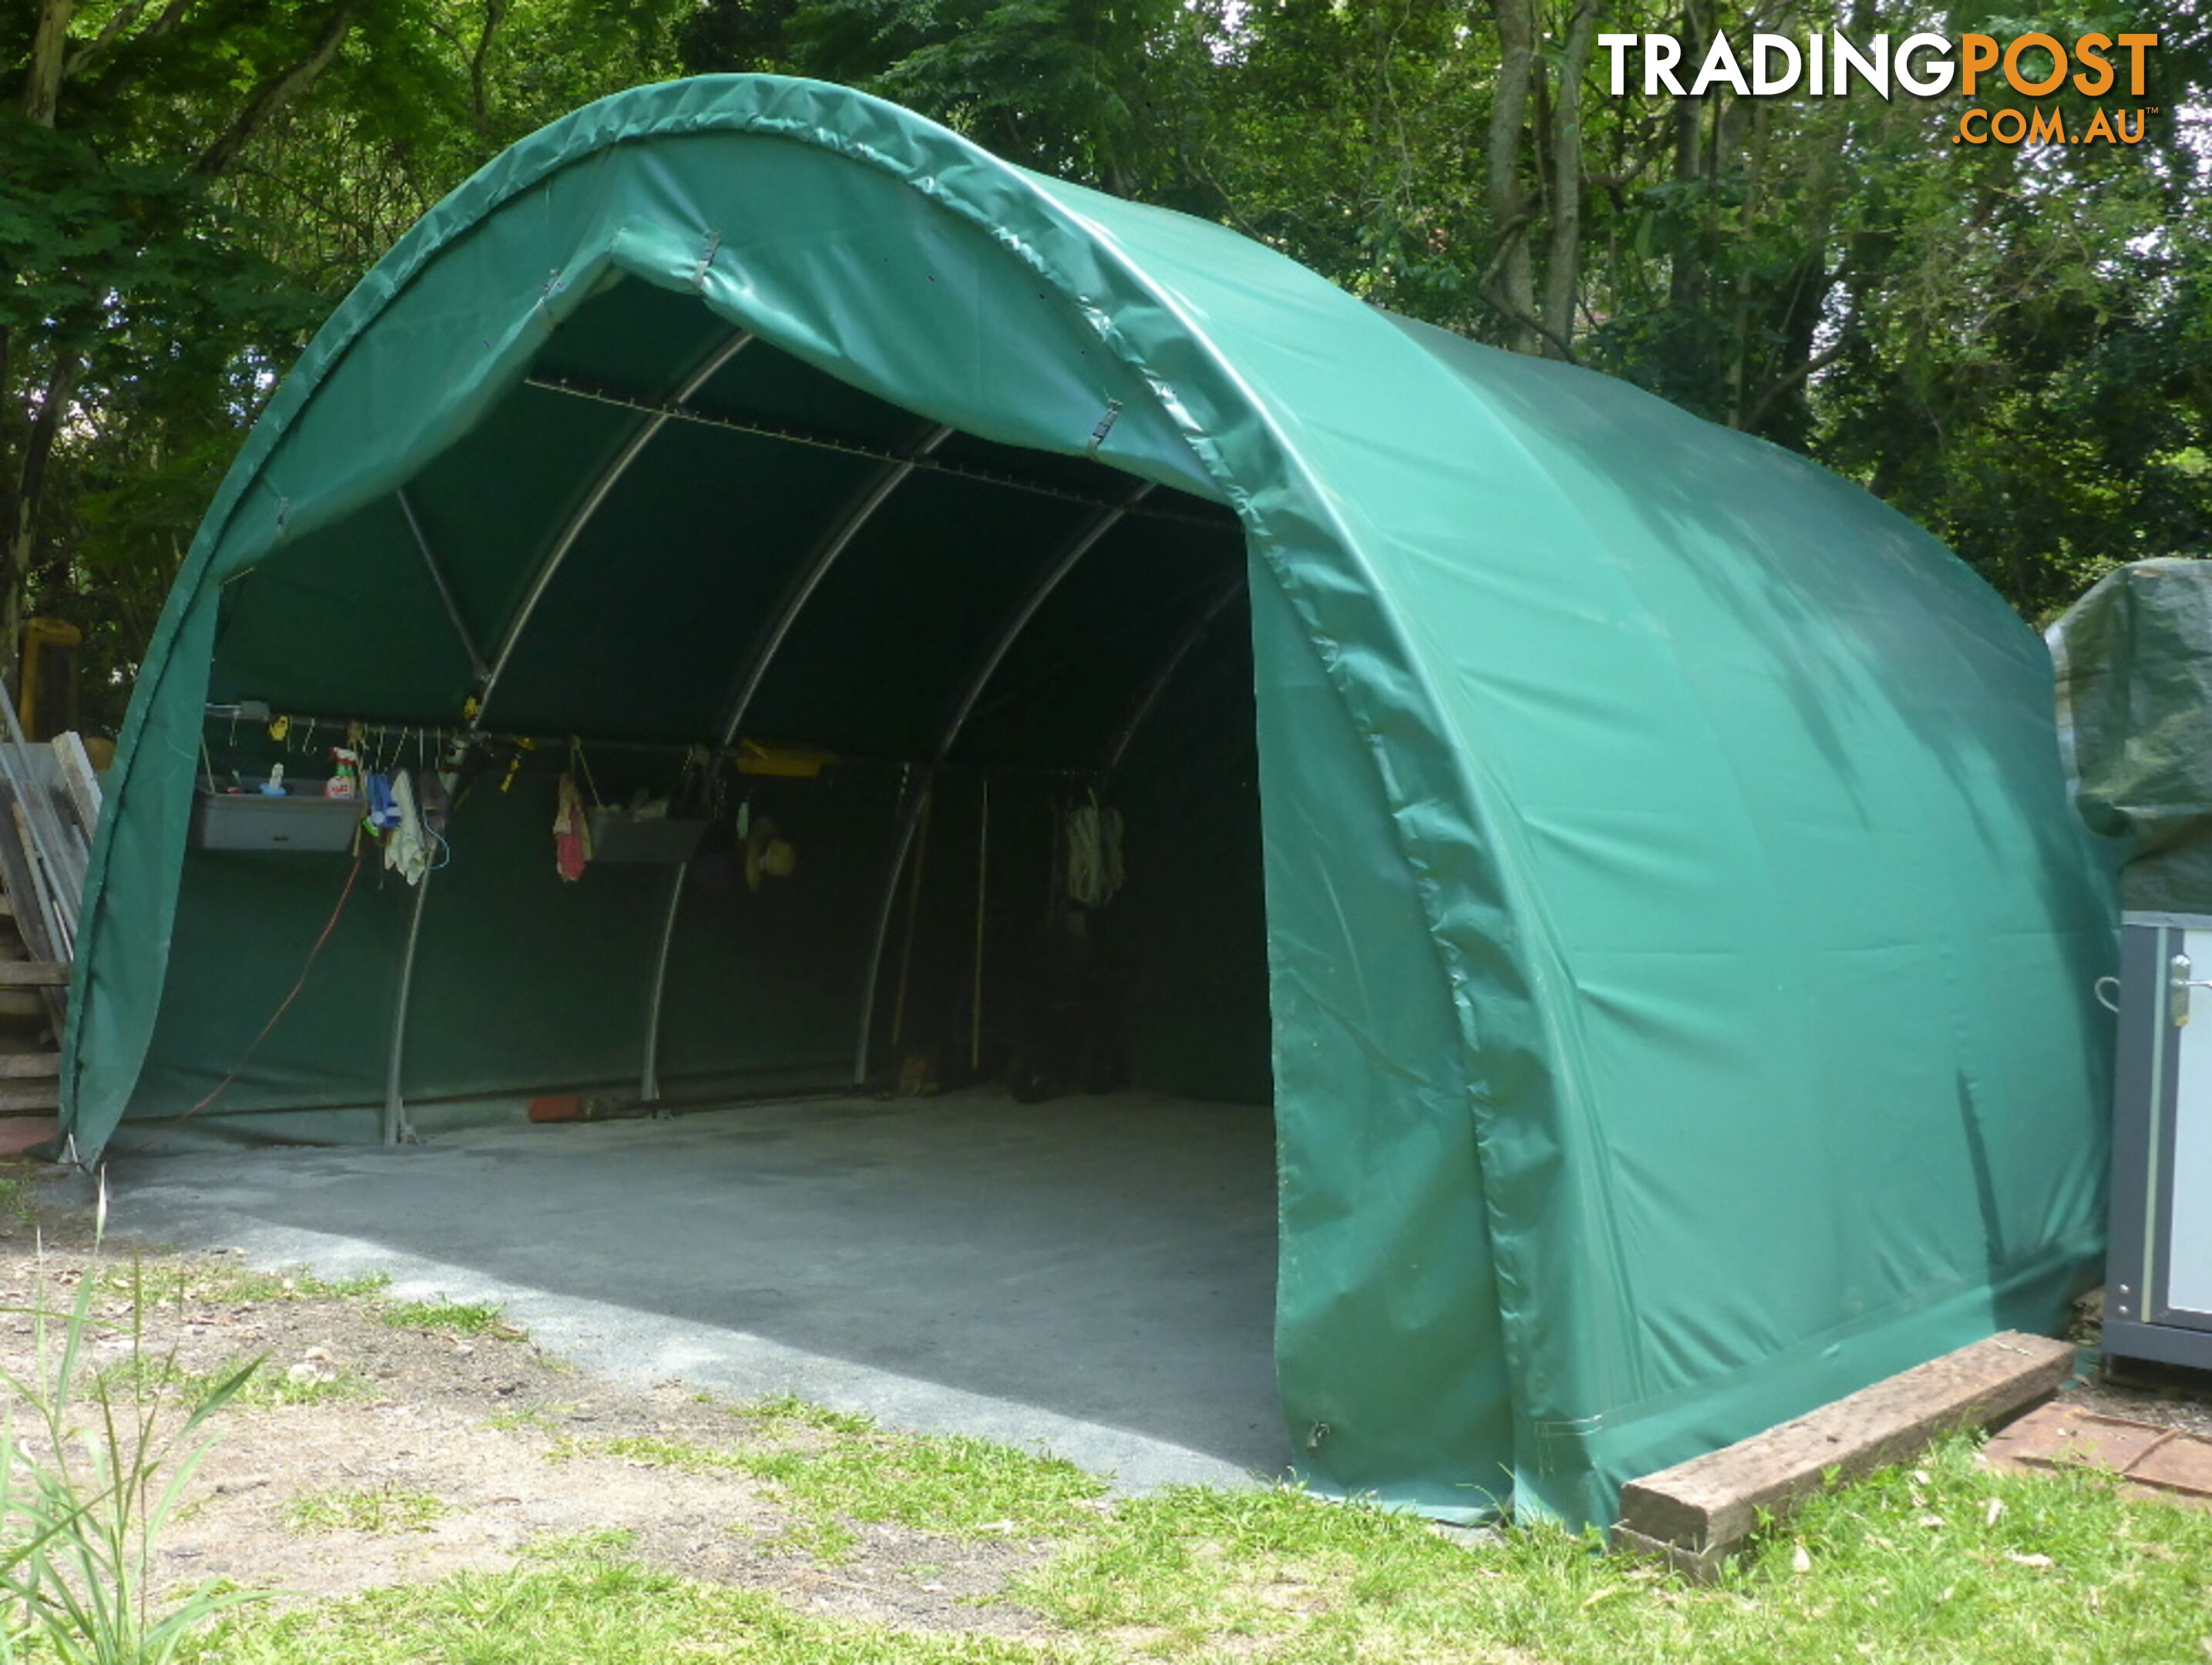 37m2 Workshop Storage Shelter Building 6m x 6m x 3.6m in Forest Green Cover